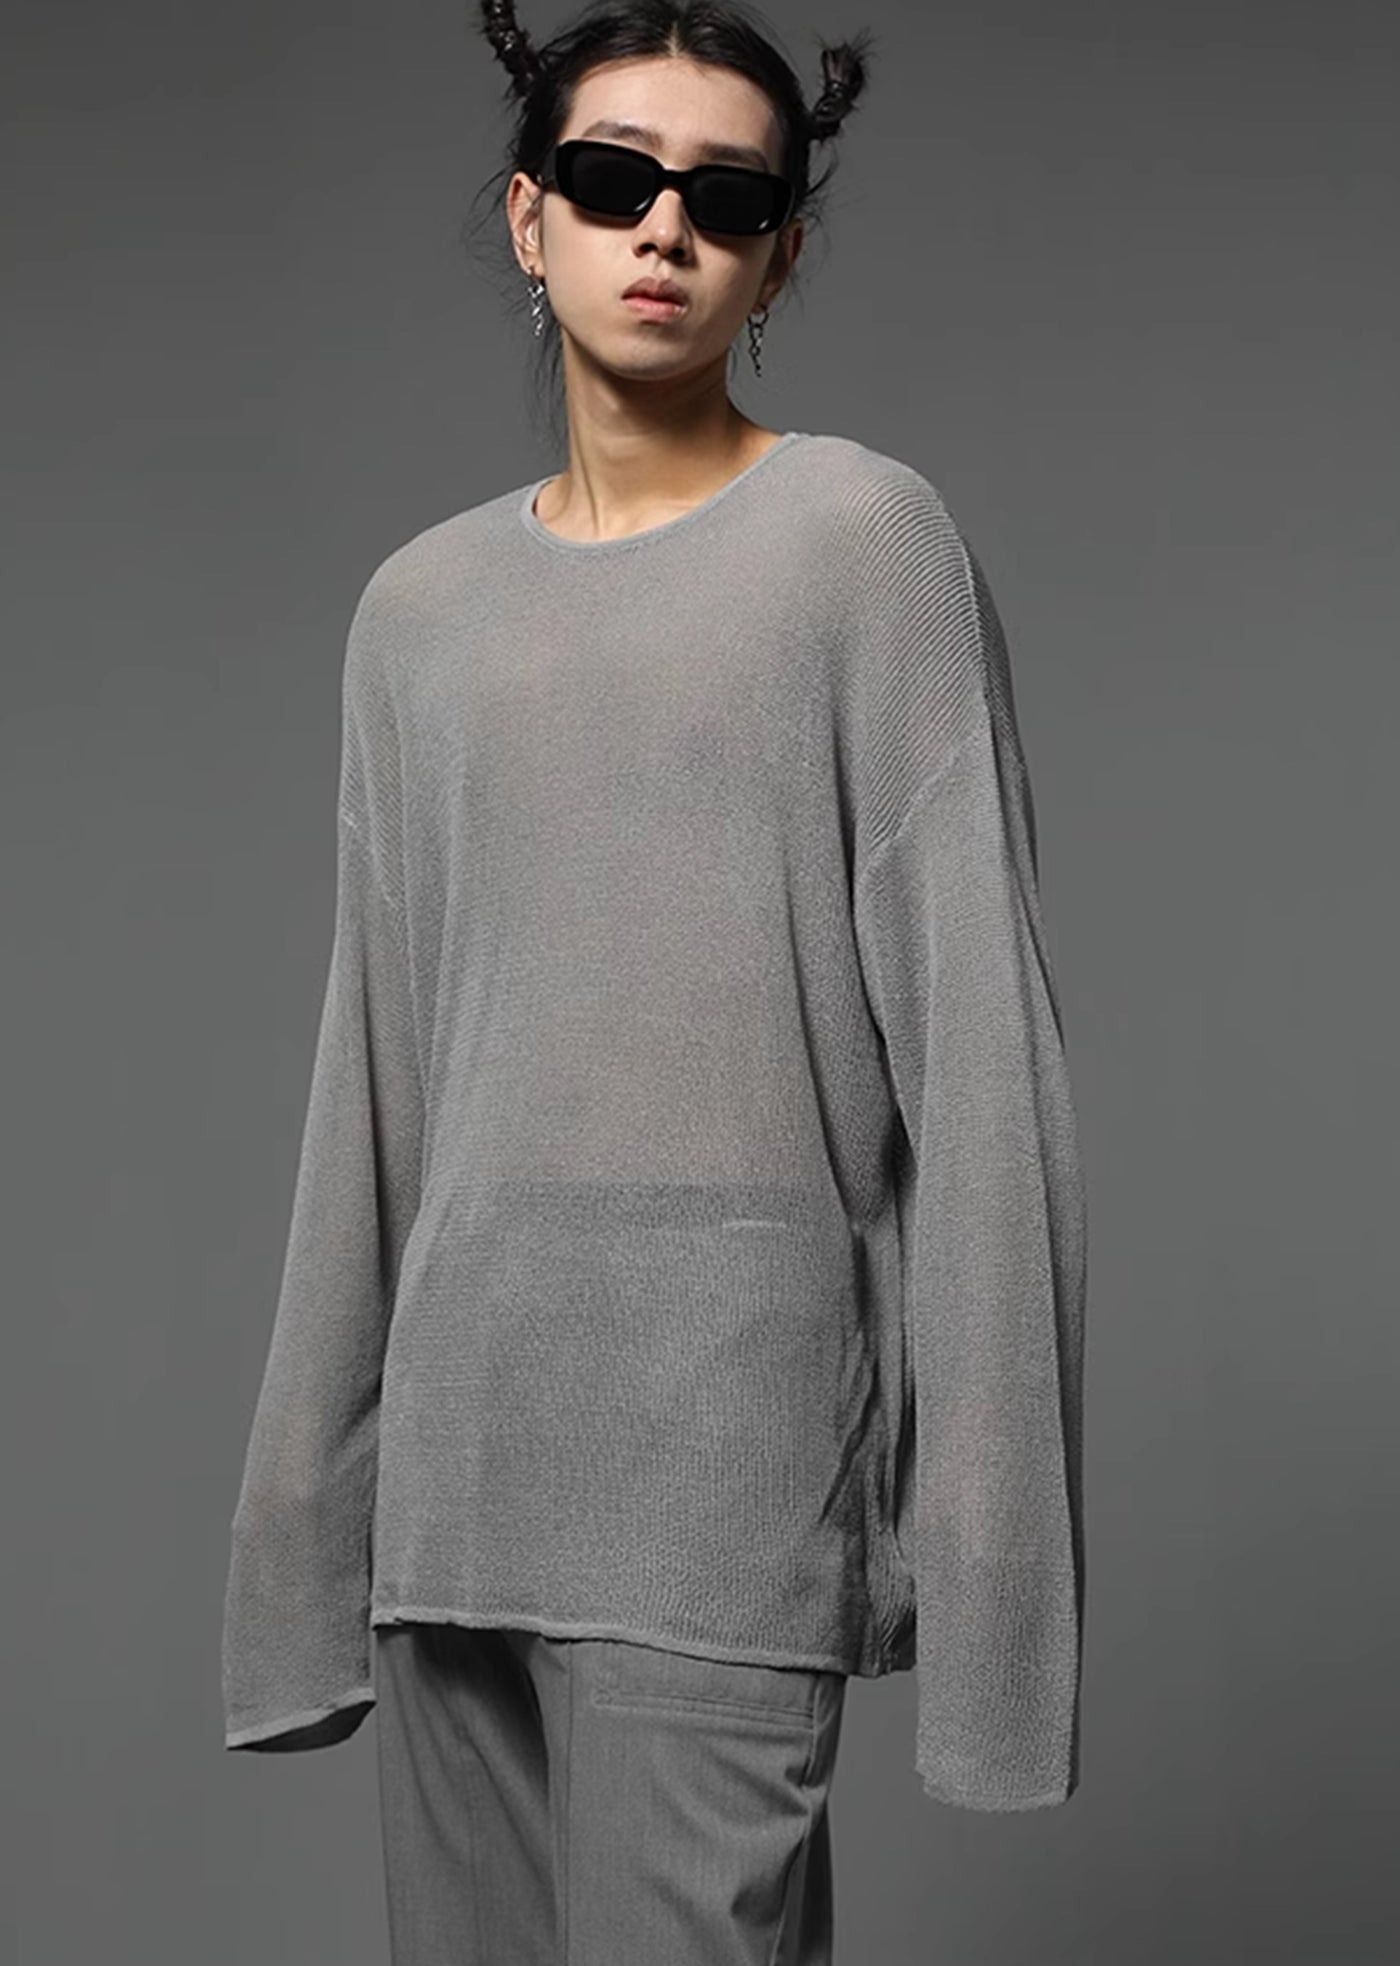 【Future Boy】Translucent sexy wide neck silhouette long sleeve T-shirt  FB0003